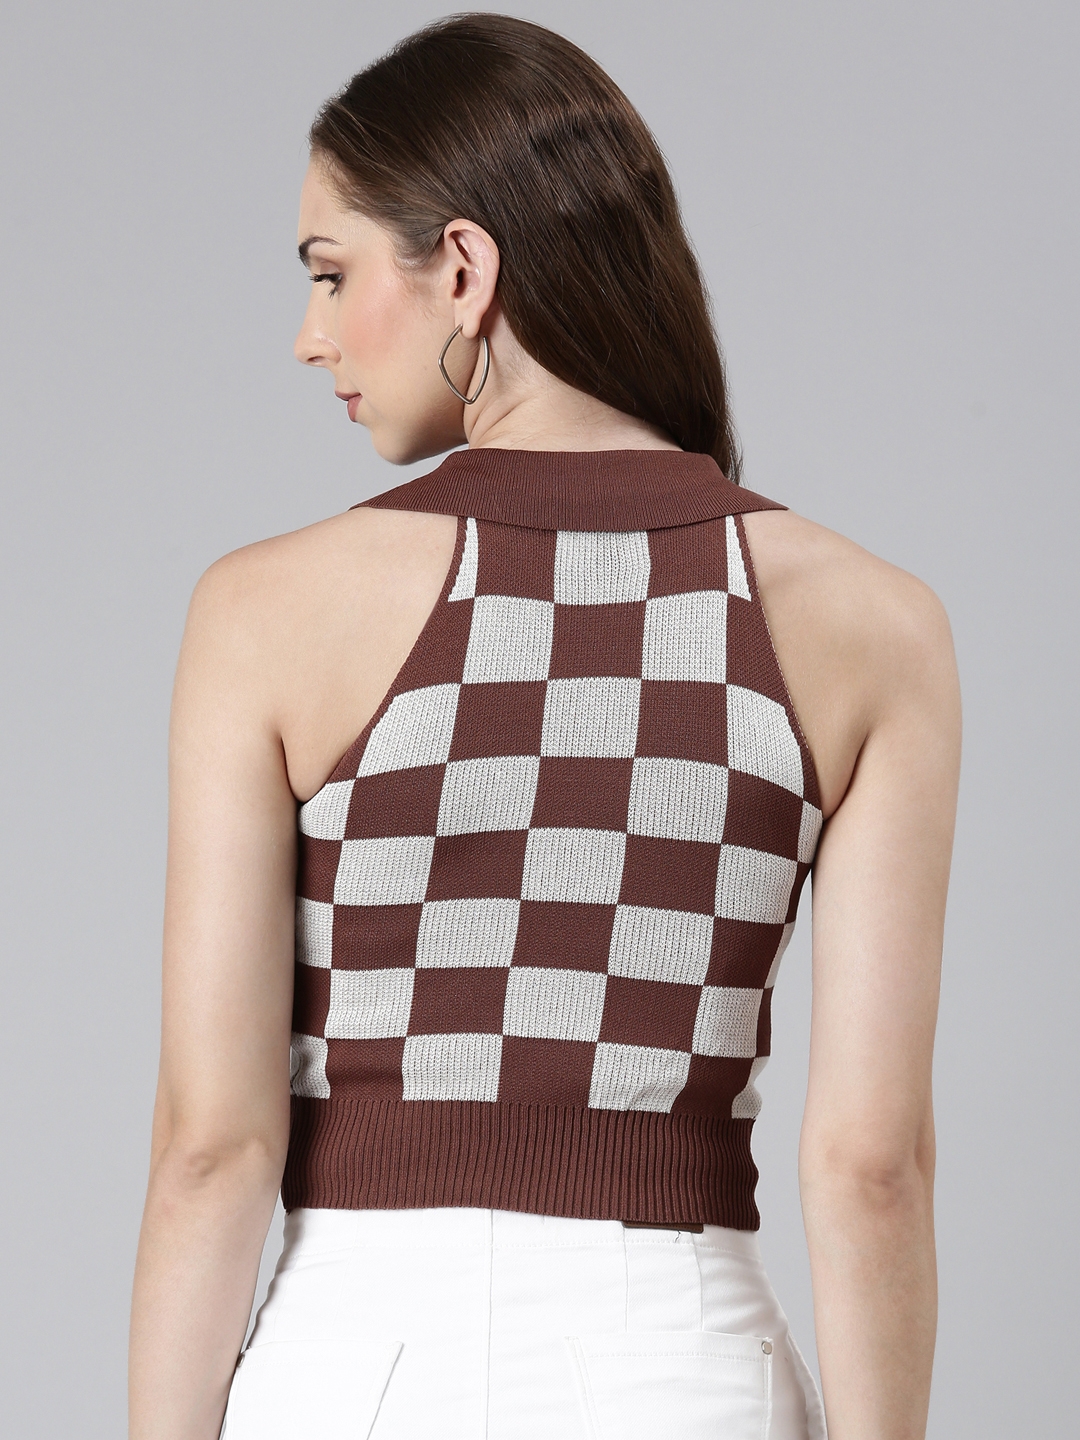 Showoff | SHOWOFF Women's Above the Keyboard Collar Checked Coffee Brown Cinched Waist Crop Top 4